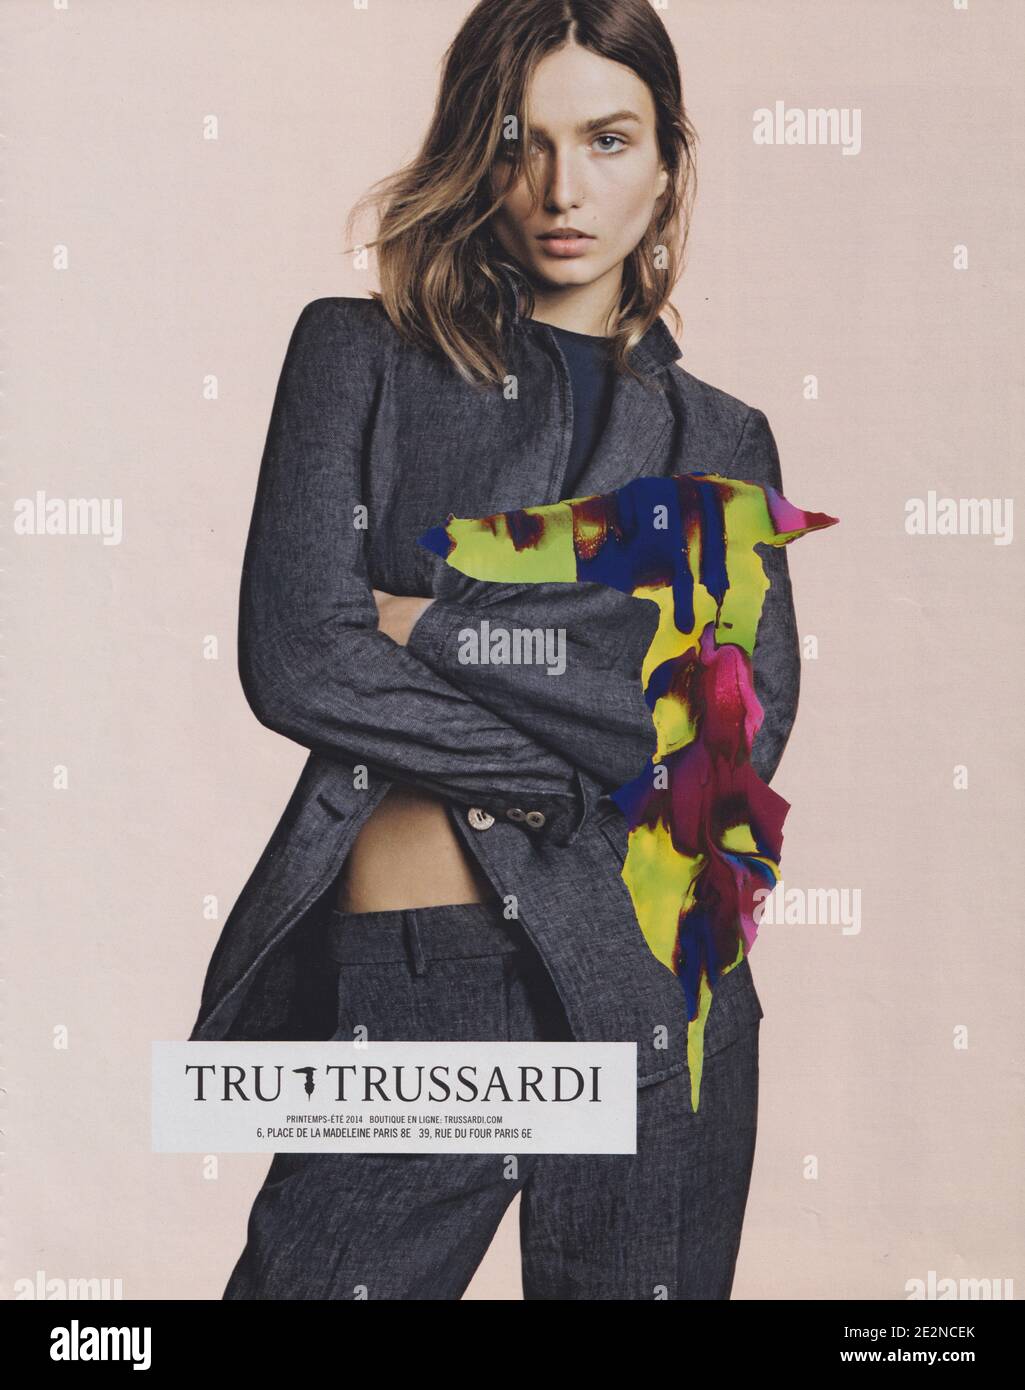 poster advertising Tru Trussardi fashion house with Andreea Diaconu in paper magazine from 2014, advertisement, creative Tru Trussardi 2010s advert Stock Photo